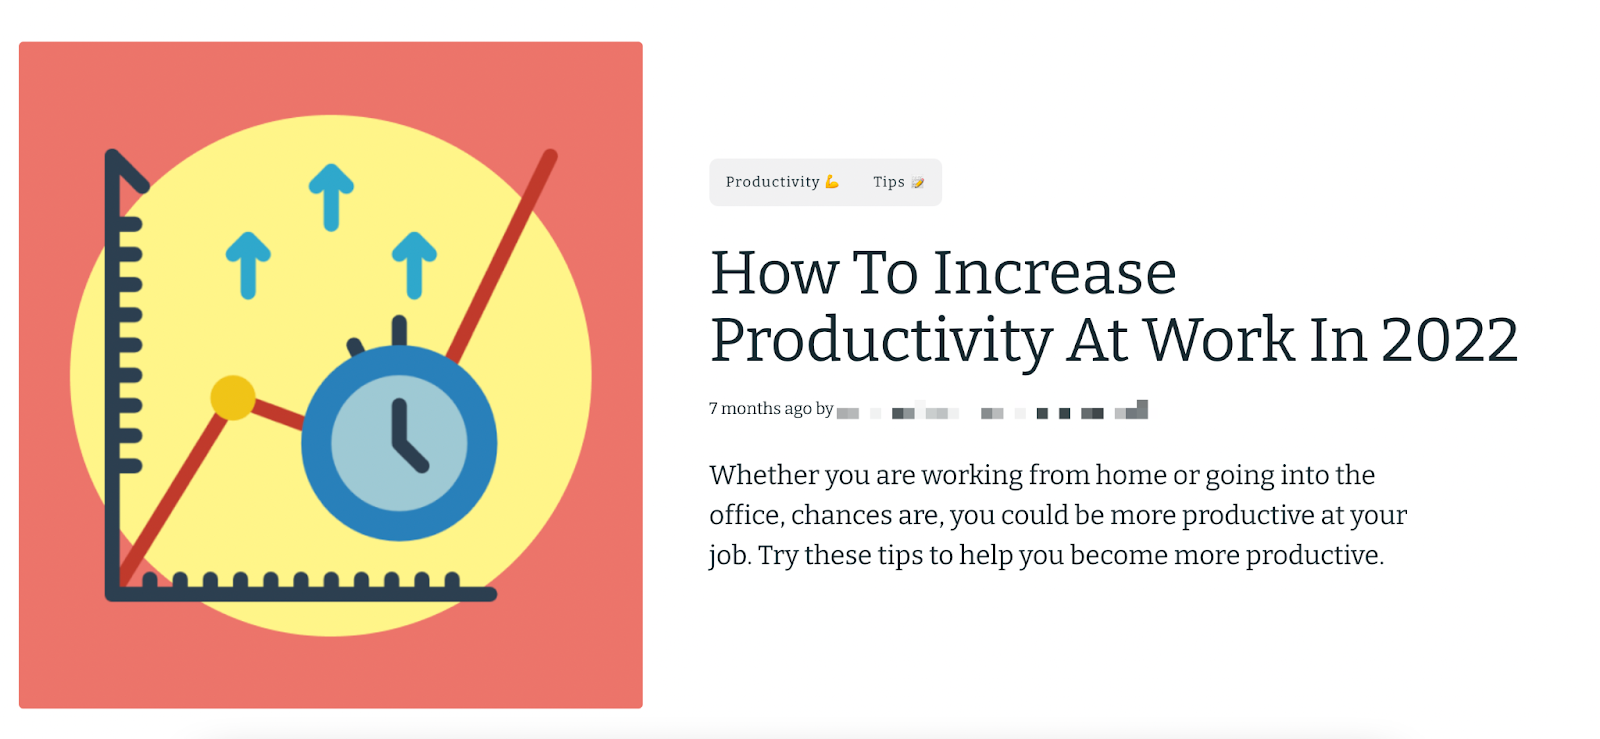 Tips on how to increase productivity at work